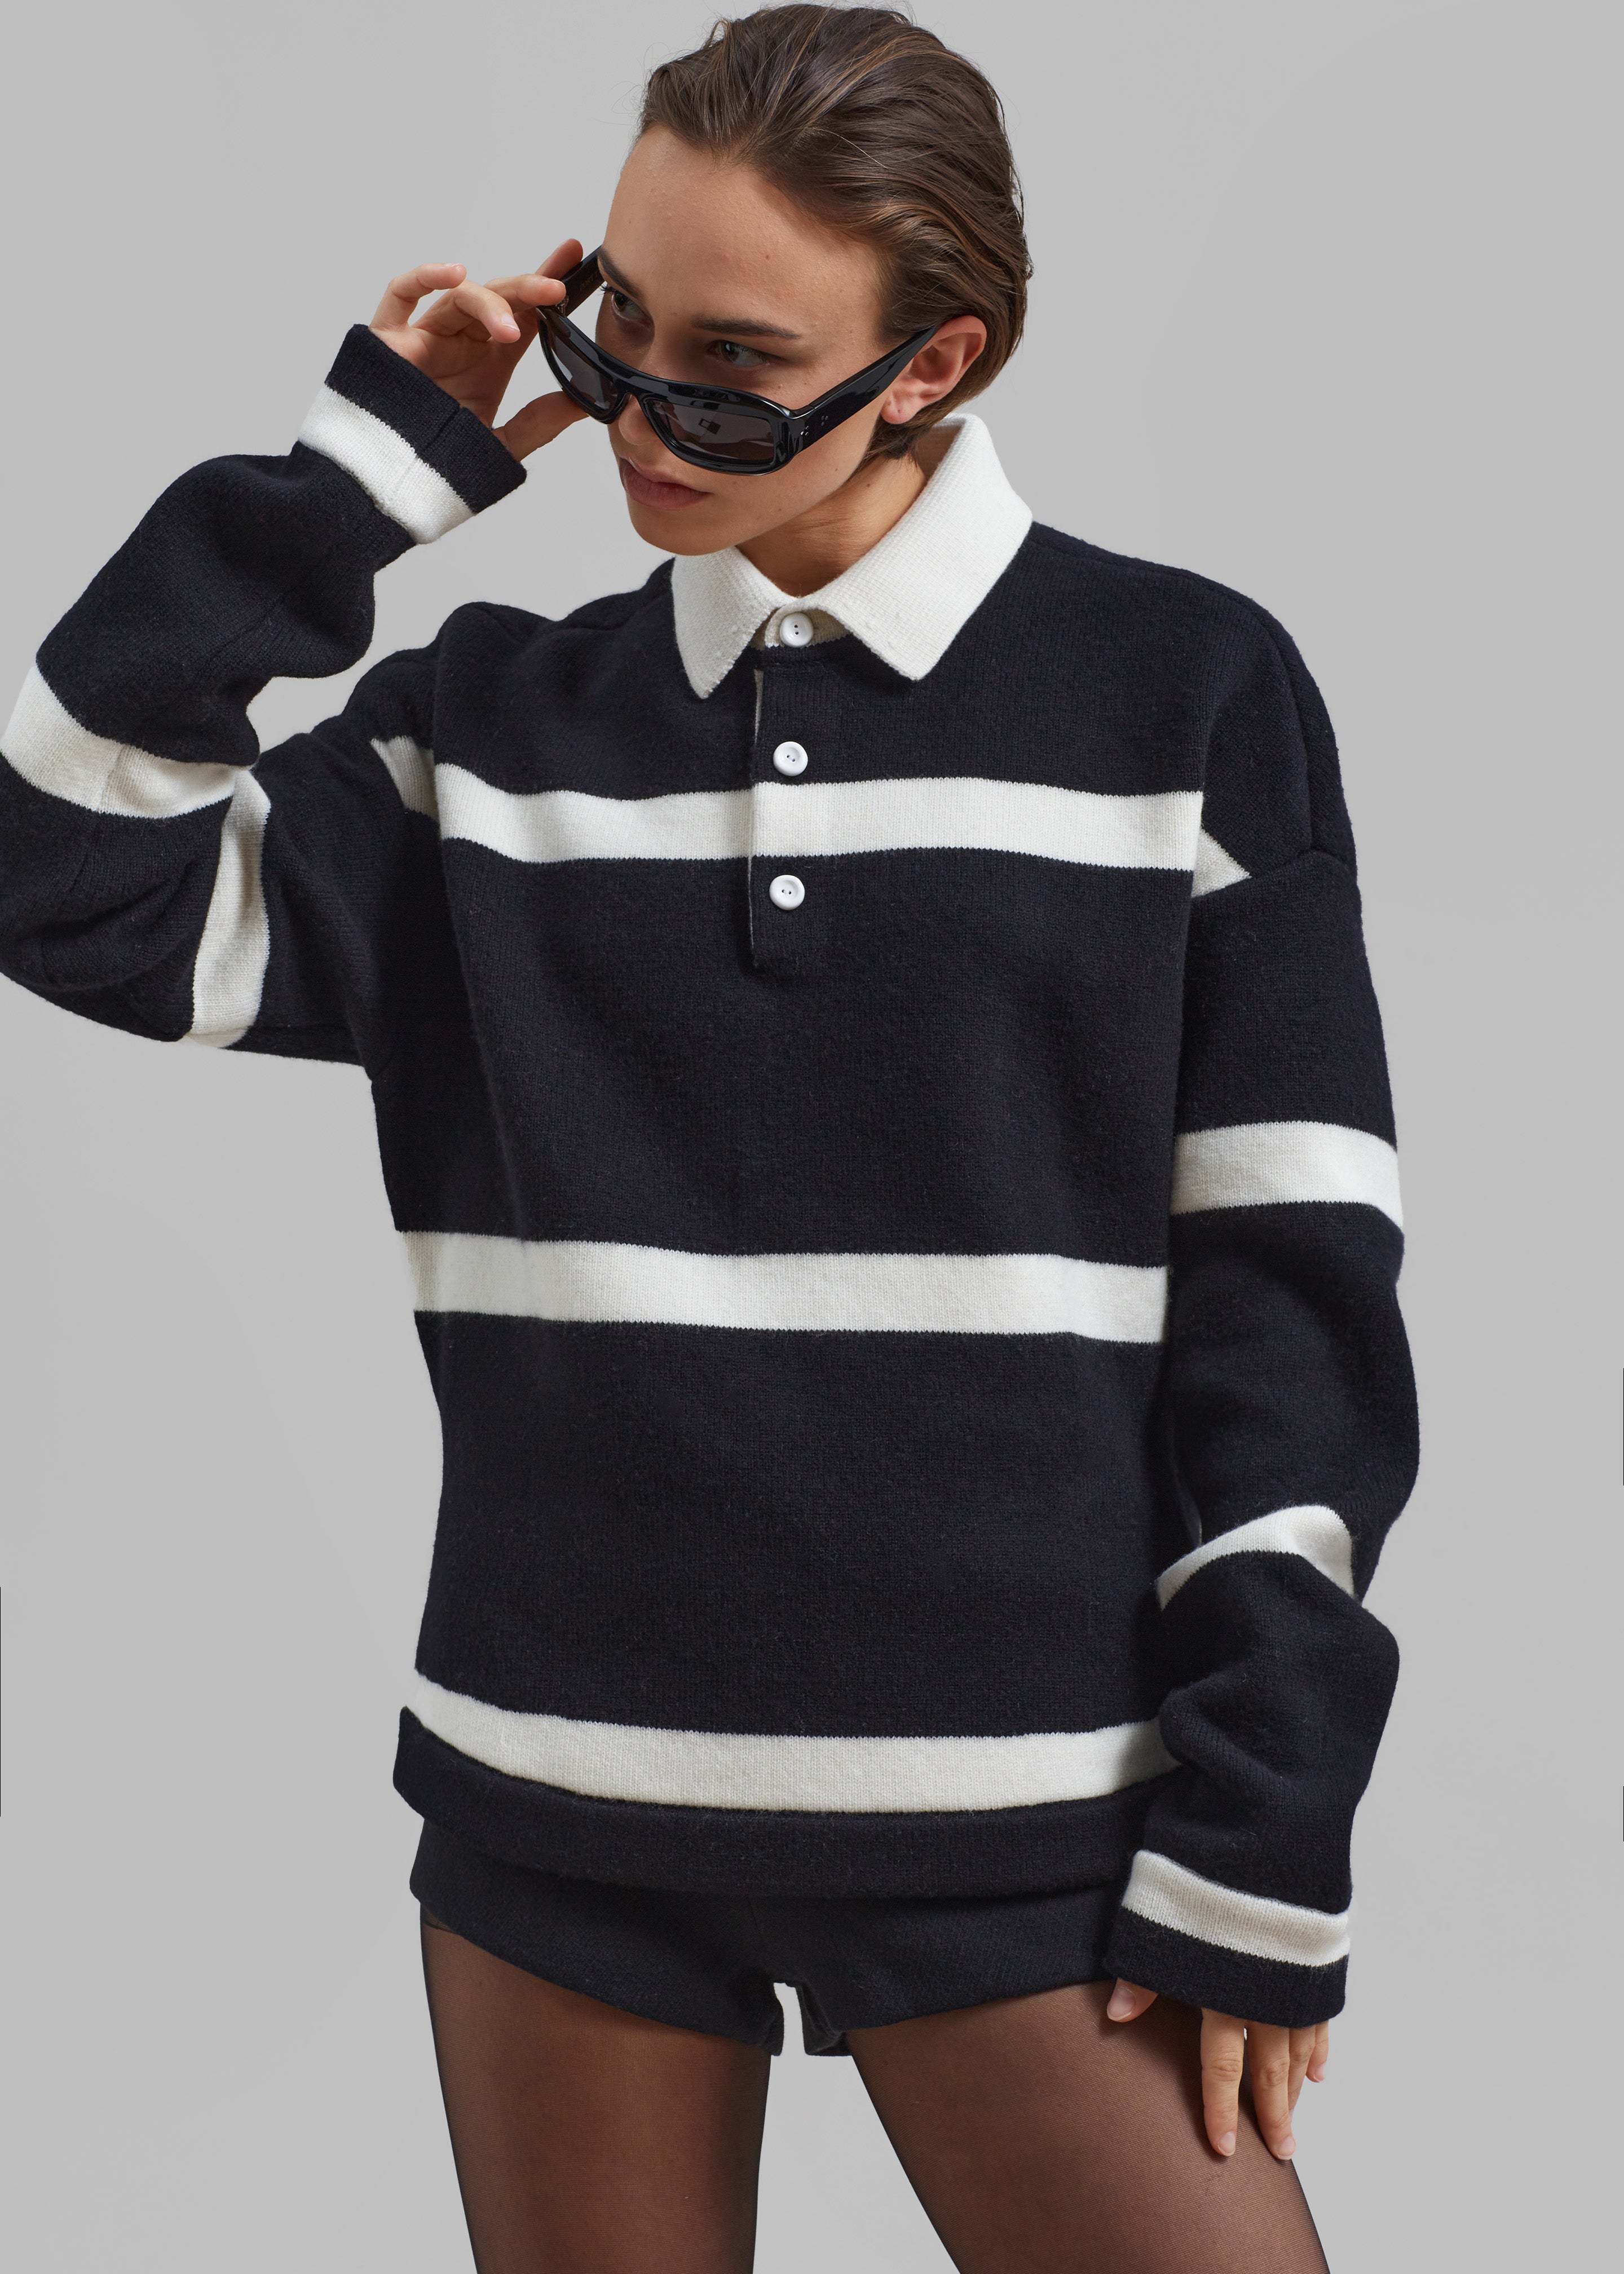 JW Anderson Structured Polo Top - Black - 5